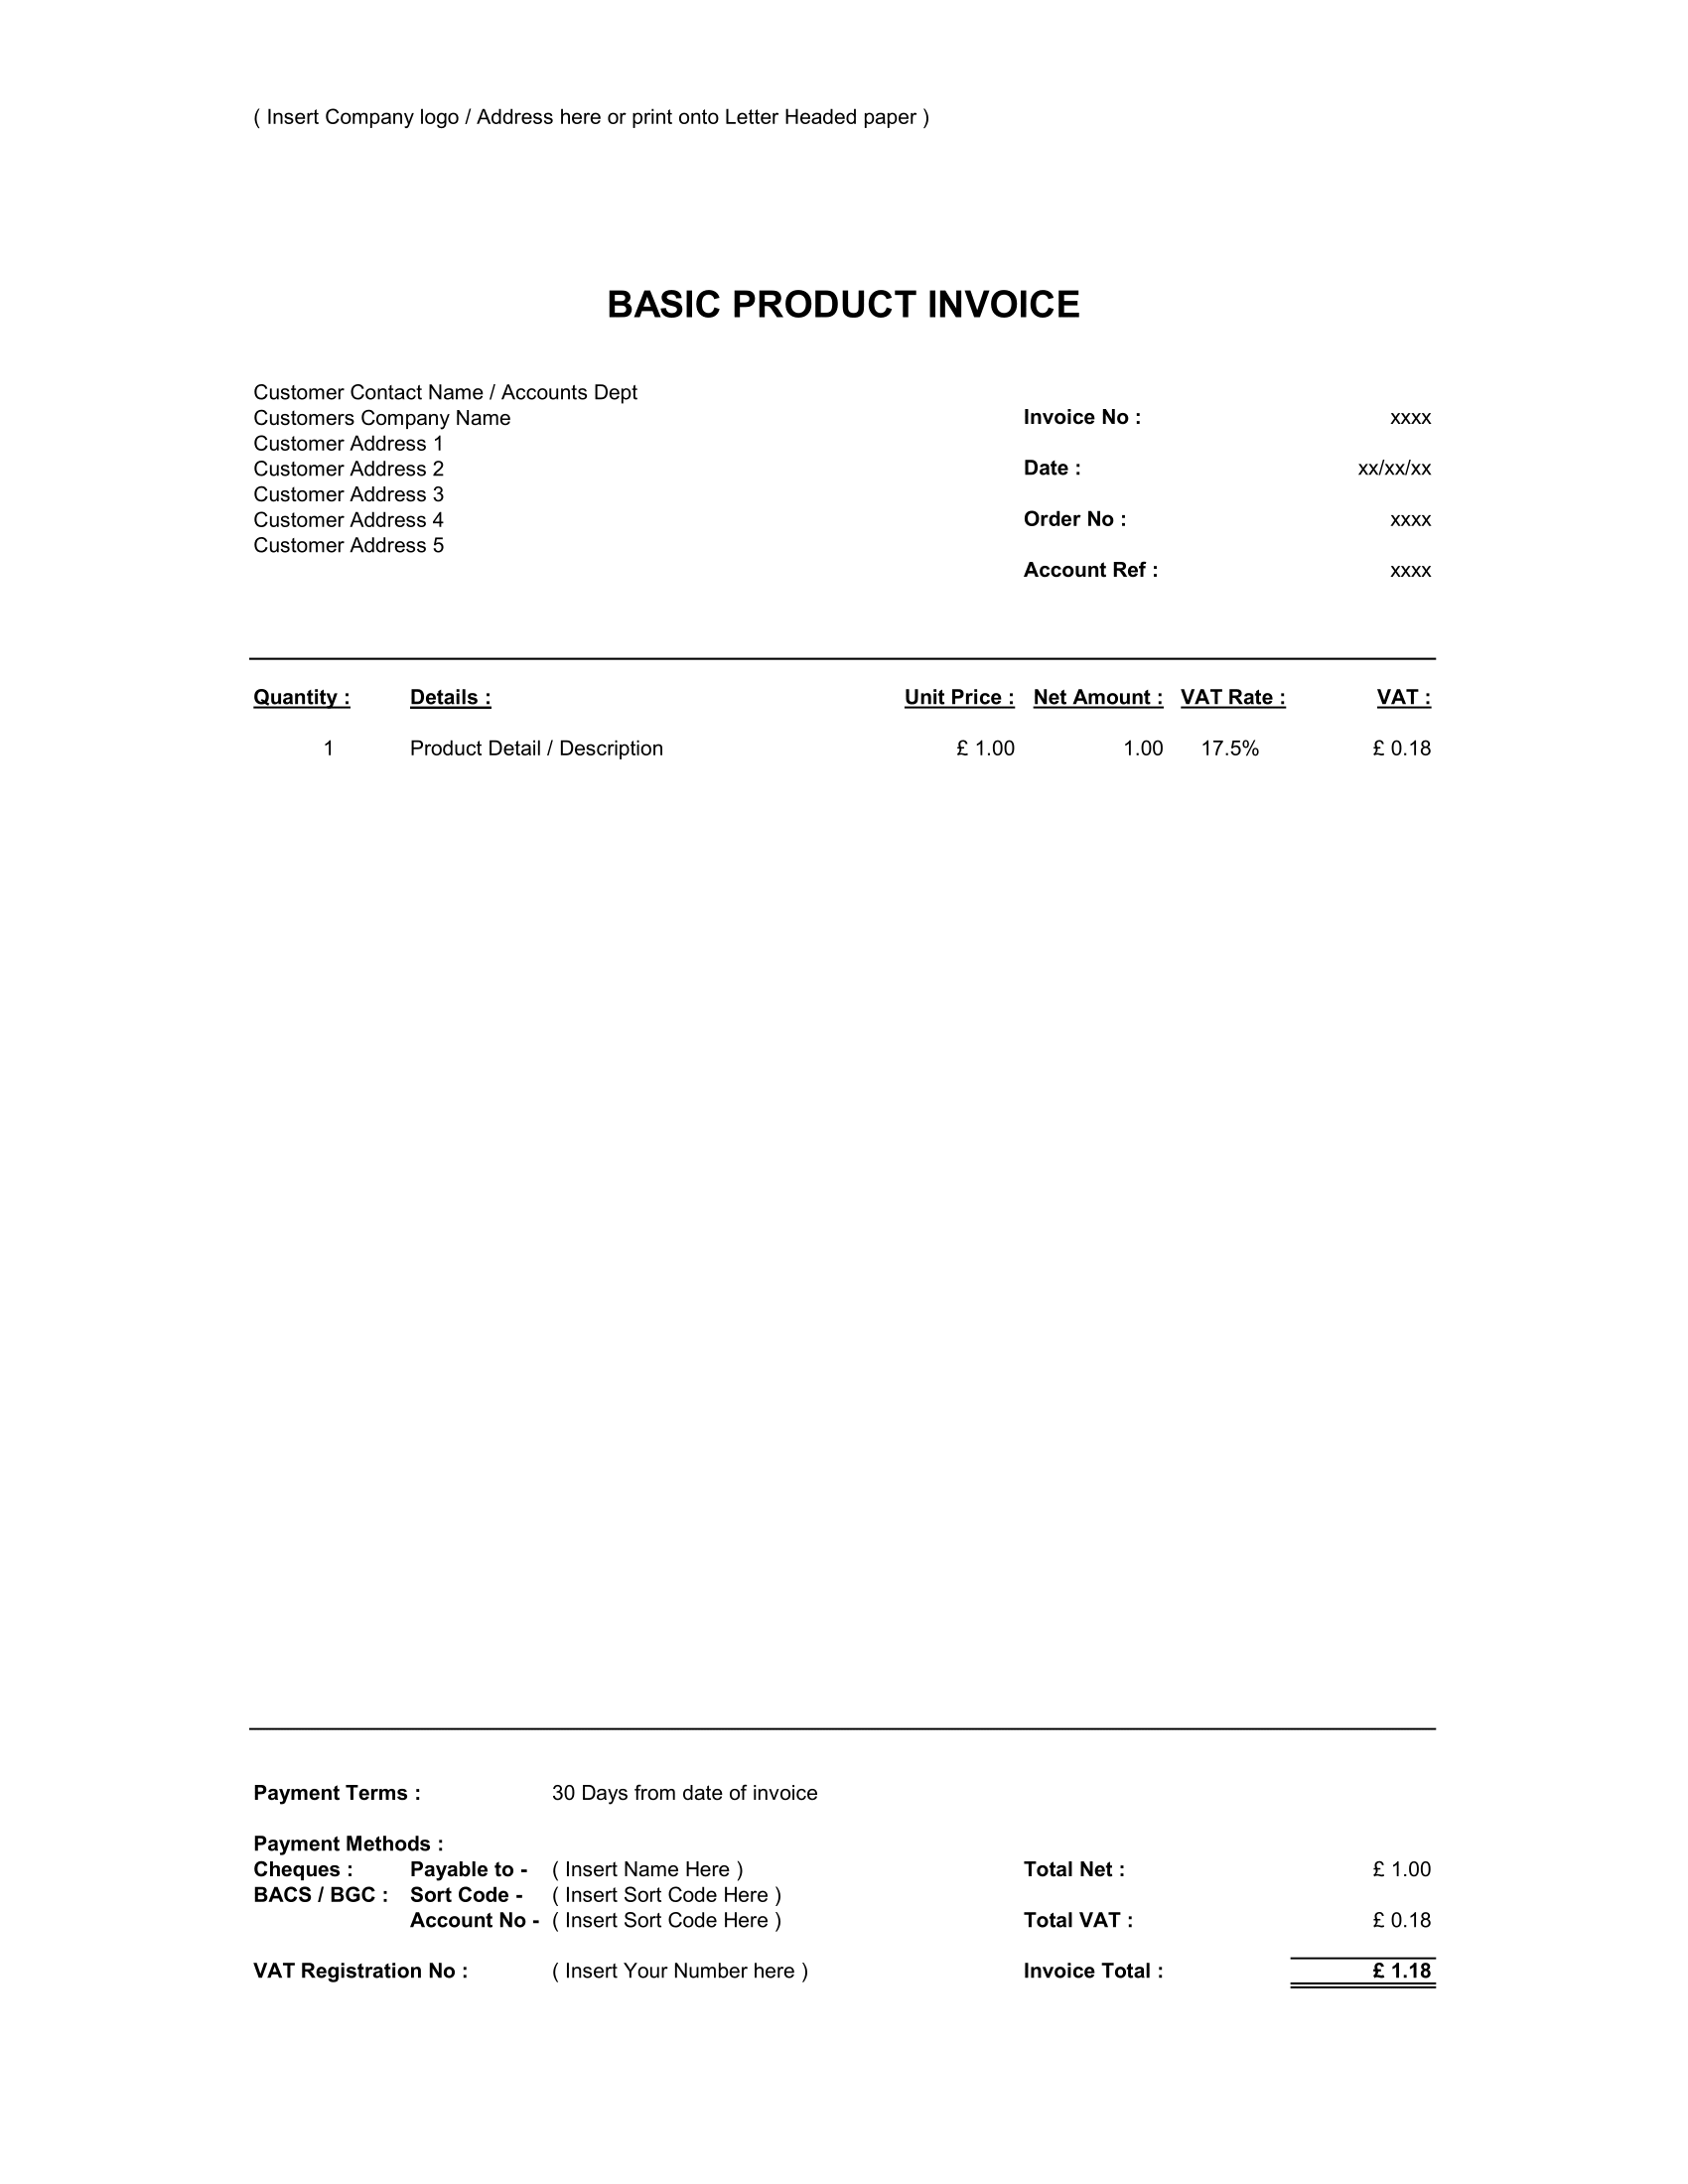 Basic Product and Services Invoice Format